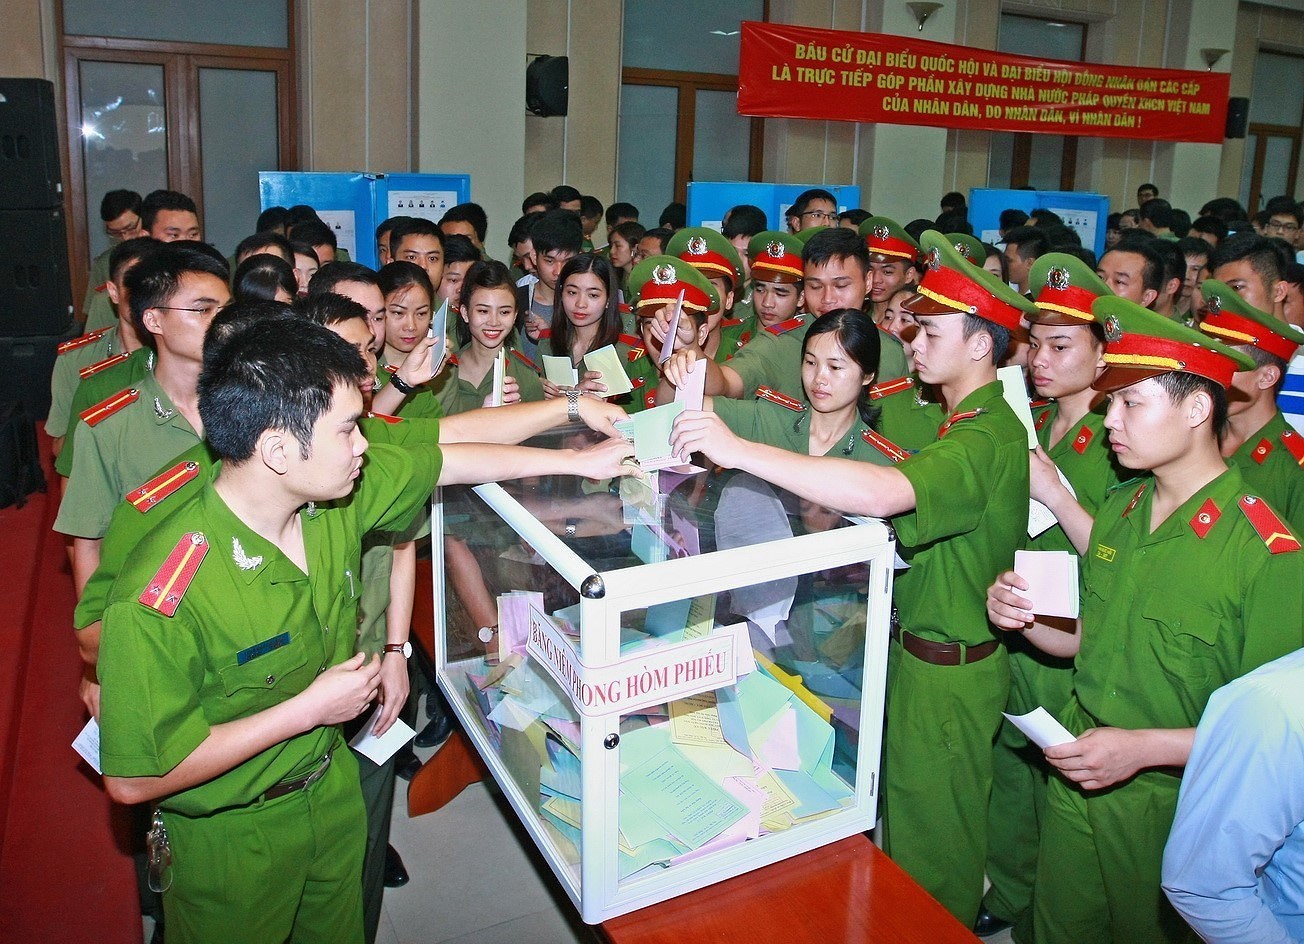 Election Day – festive day of all people hinh anh 4